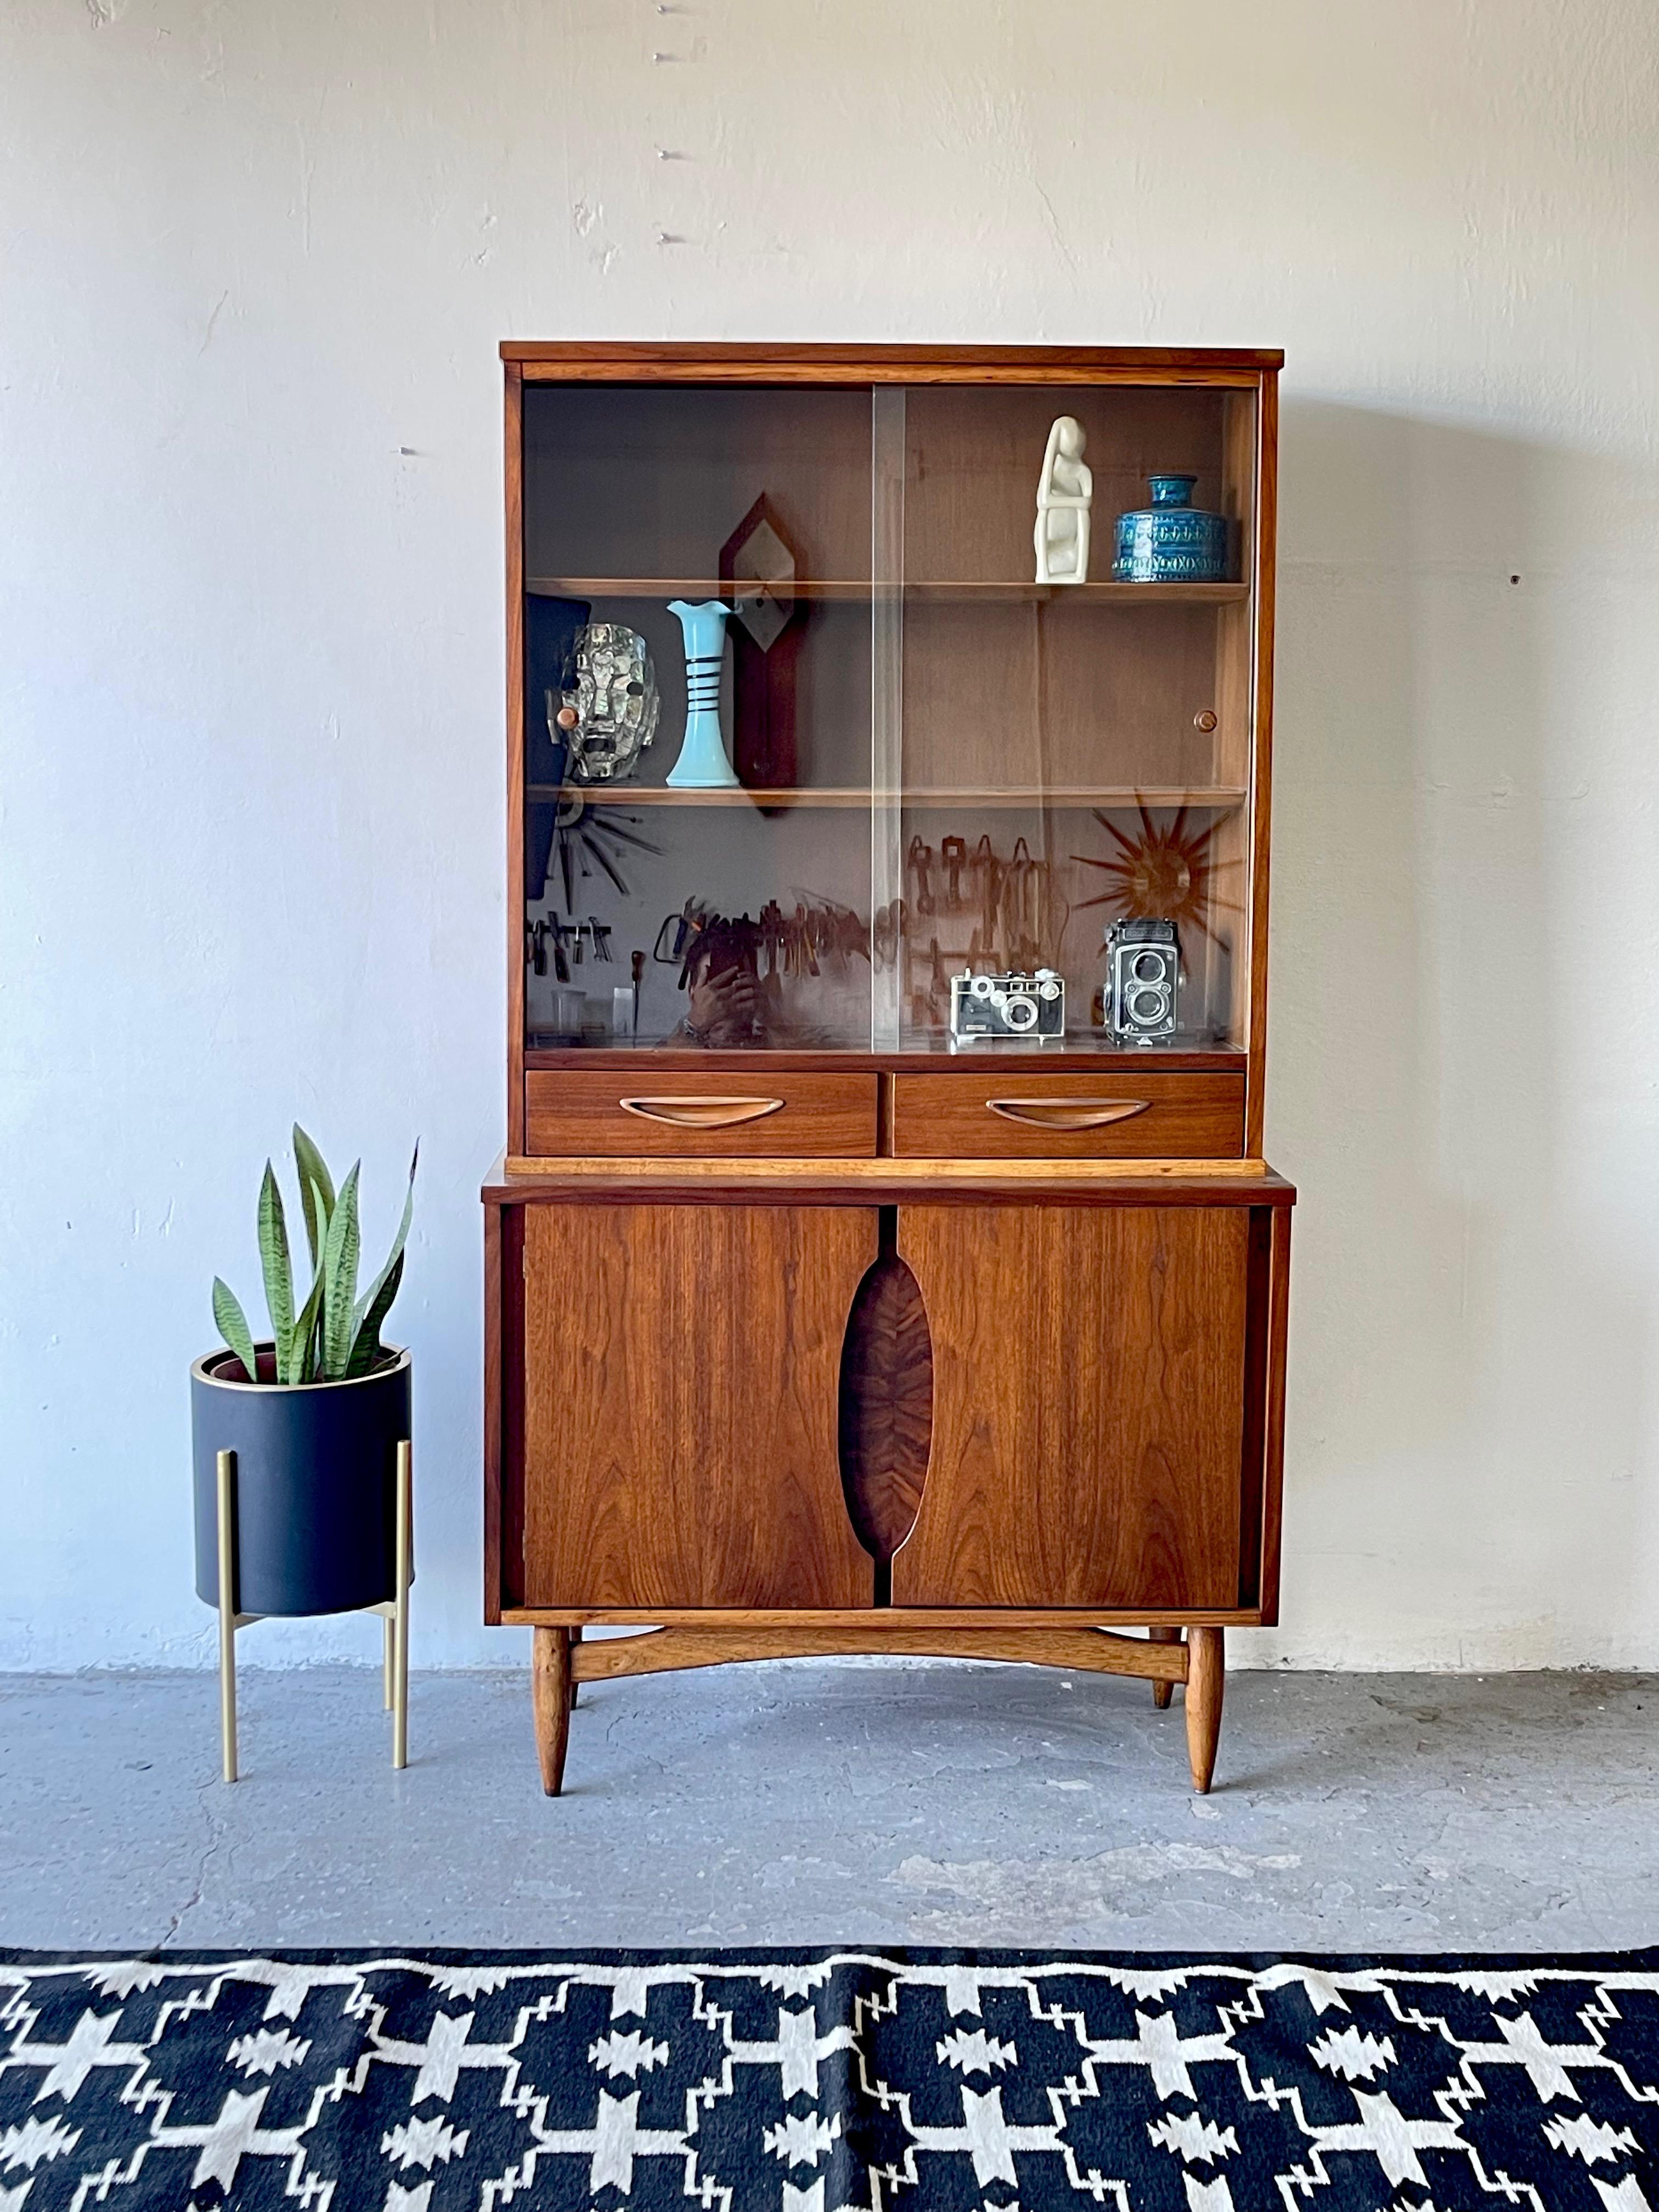 This beautiful Garrison furniture company china display cabinet is made with walnut and has glass sliding doors. It has been Professionally refinished and restored

This cupboard is an excellent example of Mid-Century Modern furniture with a sleek